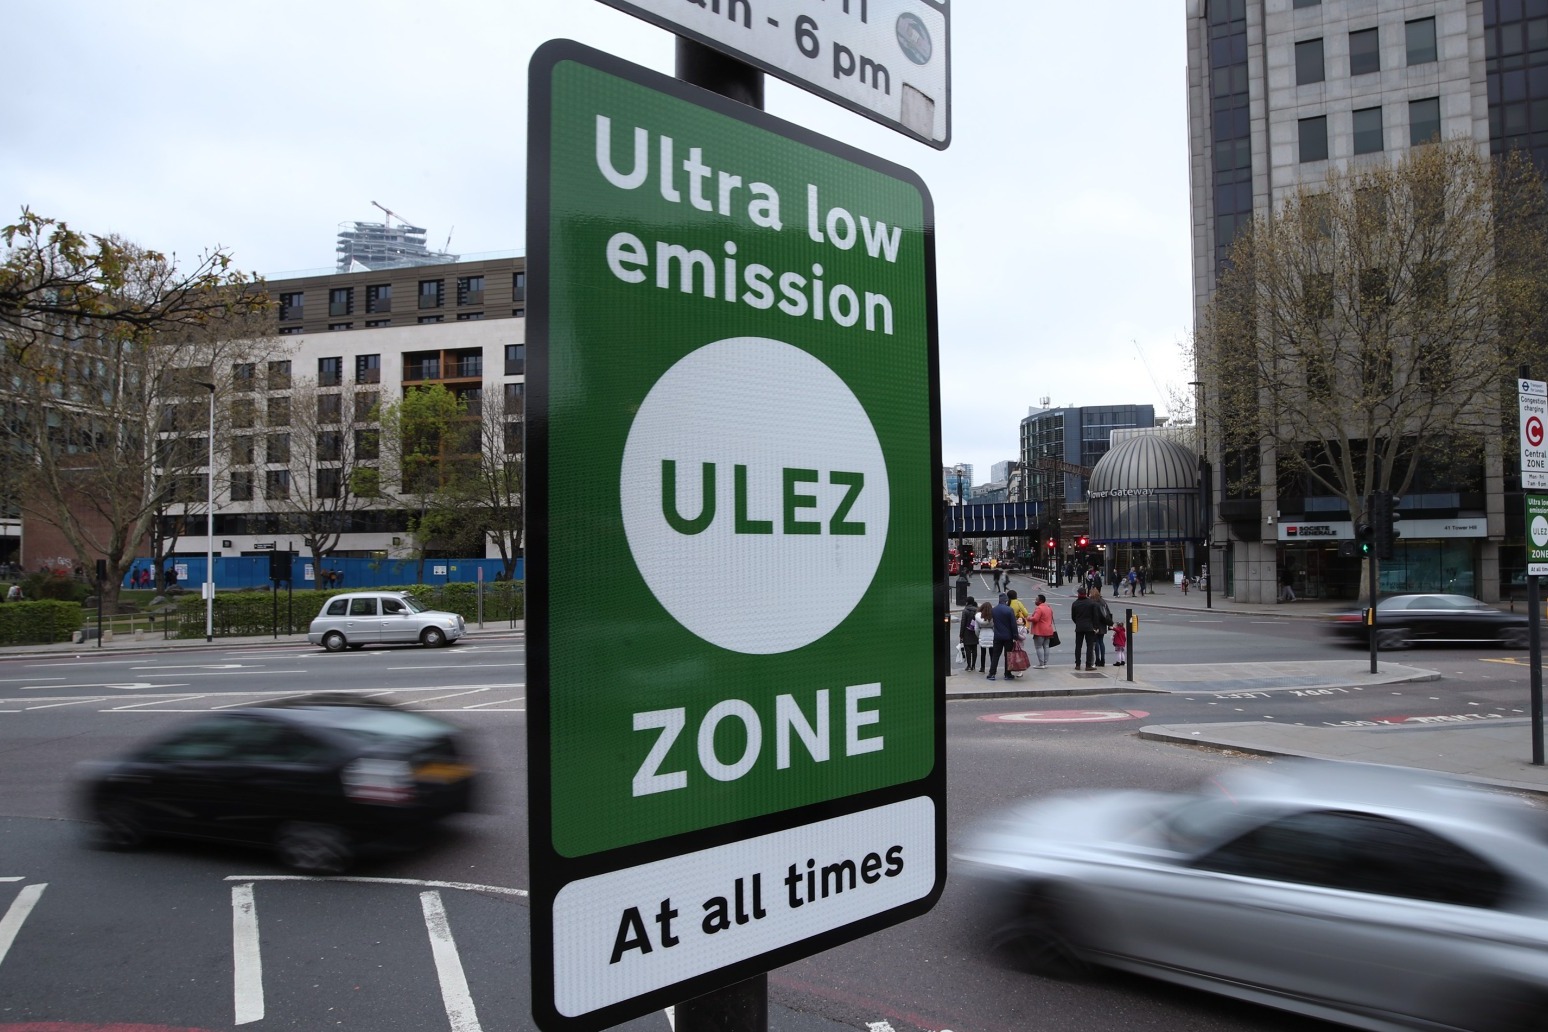 Expanding London’s ultra-low emission zone boosted TfL’s income by almost £100m 